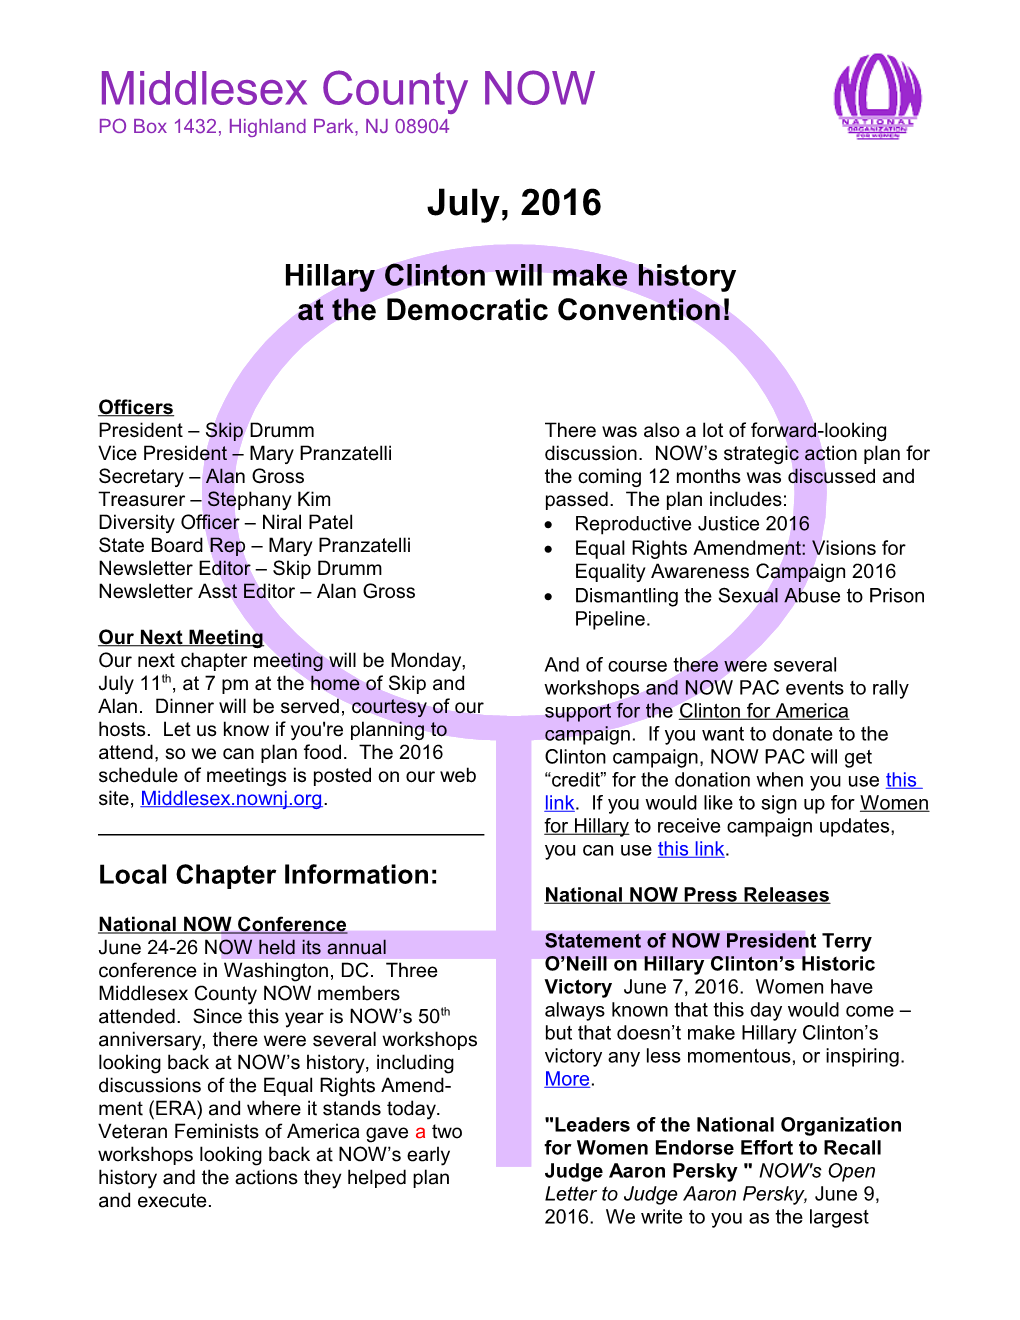 Middlesex County NOW Newsletter, July